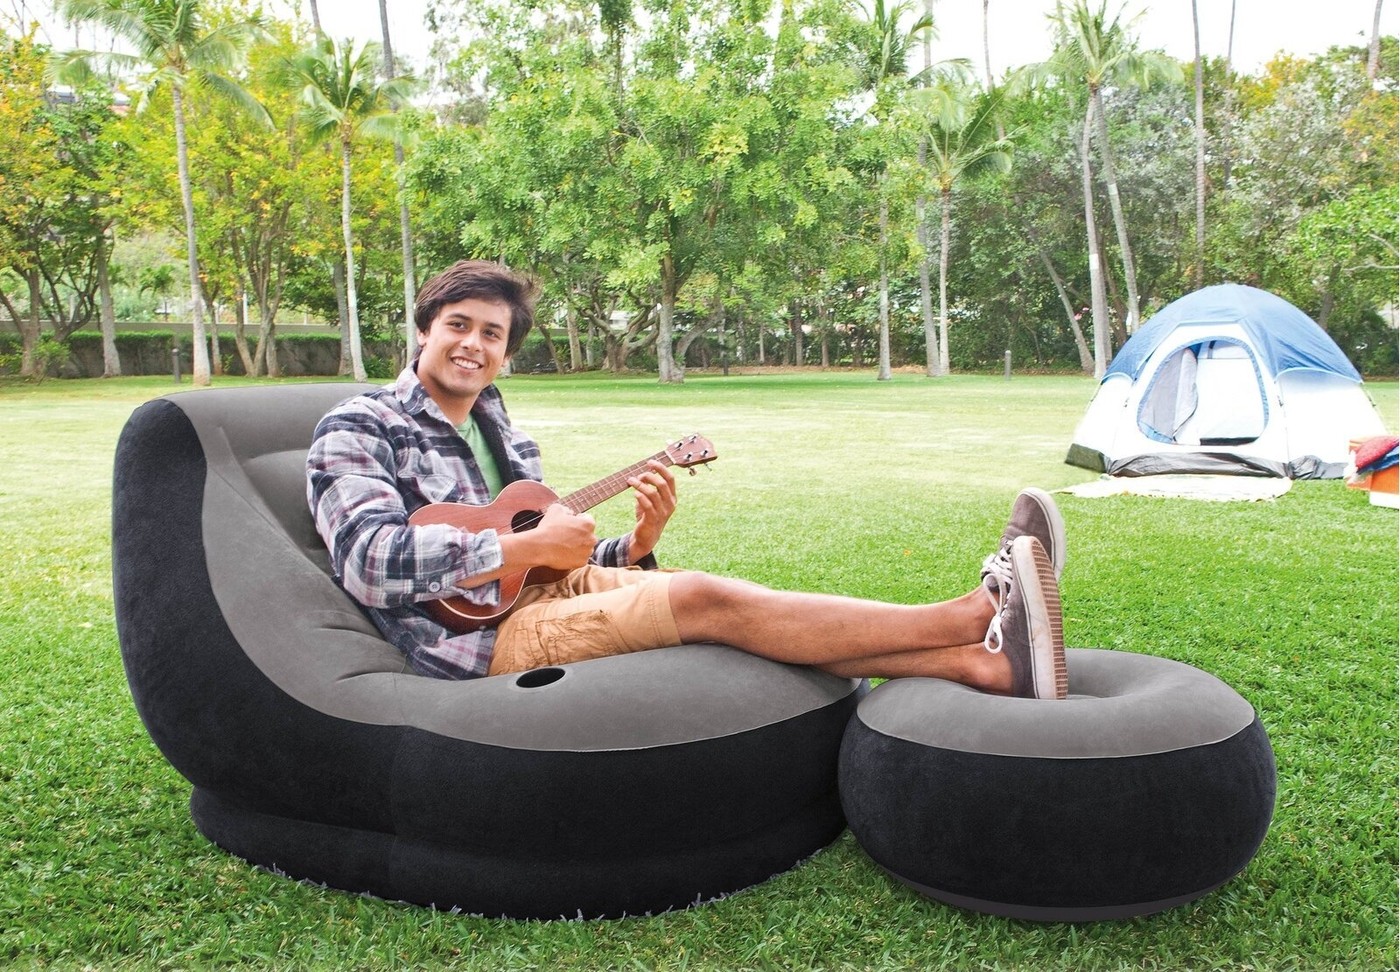 Details about   New Inflatable Lazy Sofa Chair Flocked Bean Bag Garden Yard Home Indoor Outdoor 